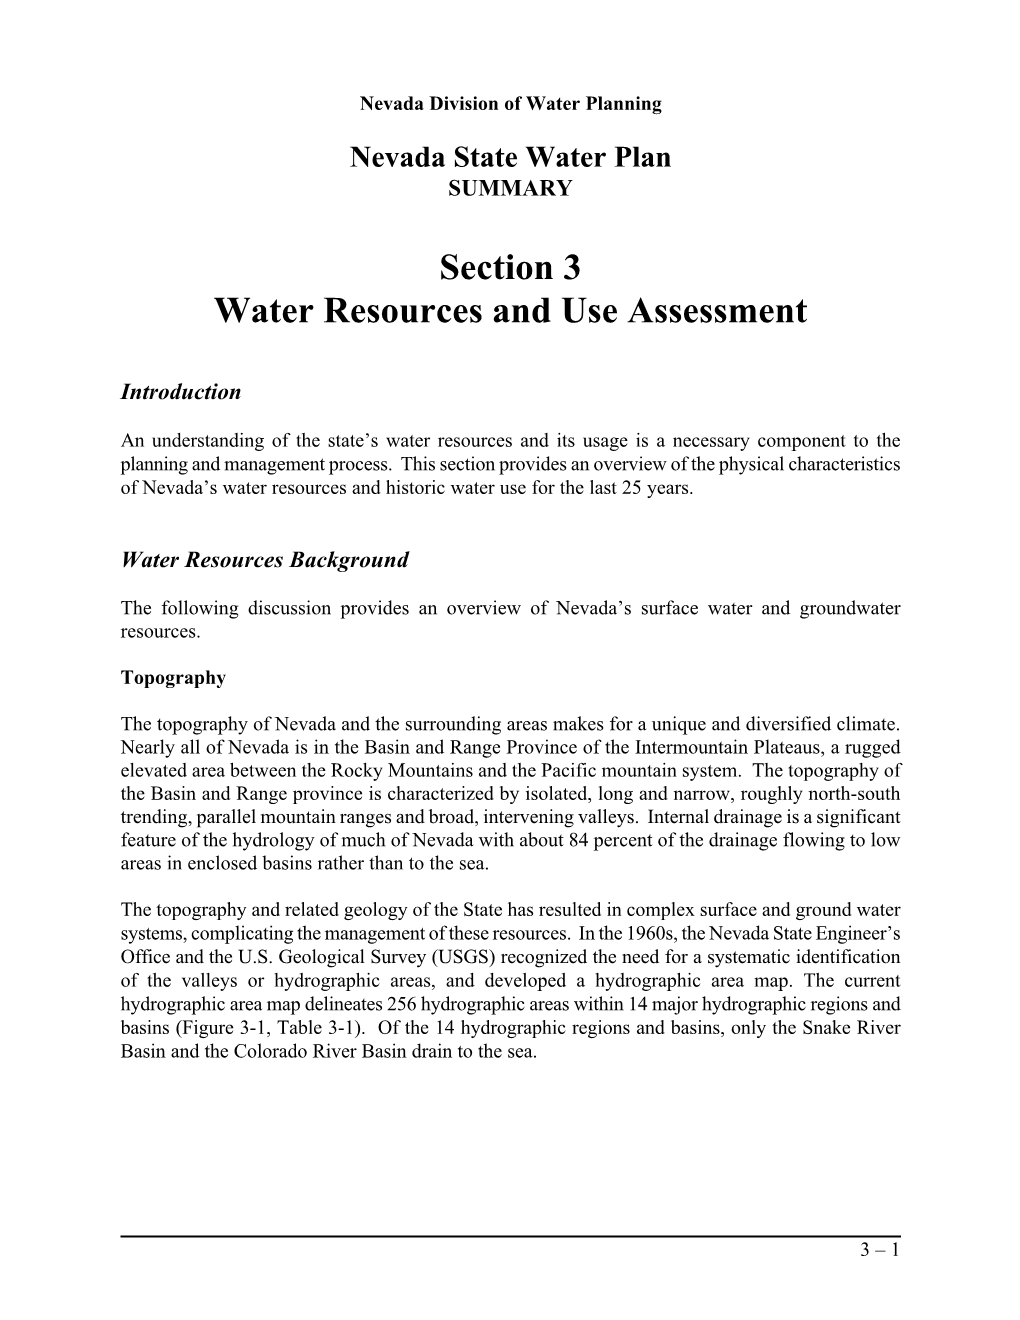 Section 3 Water Resources and Use Assessment